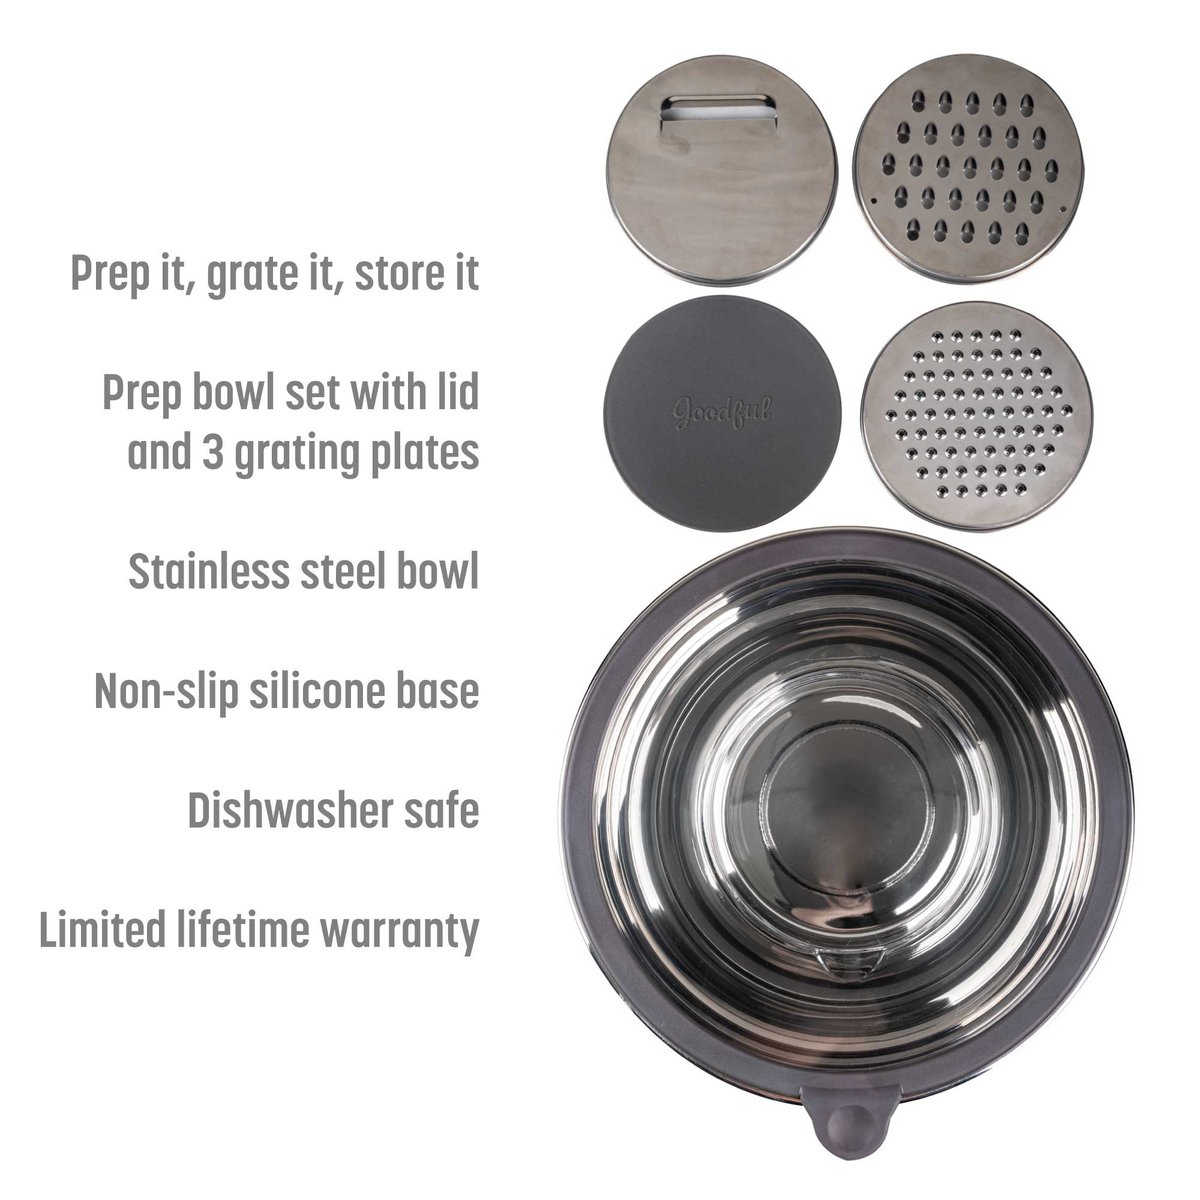 https://images.verishop.com/goodful-kitchen-goodful-stainless-steel-mixing-bowl-with-non-slip-bottom-lid-and-3-interchangeable-grater-inserts-5-quart-charcoal-gray/M00741393579451-2876949048?auto=format&cs=strip&fit=max&w=1200